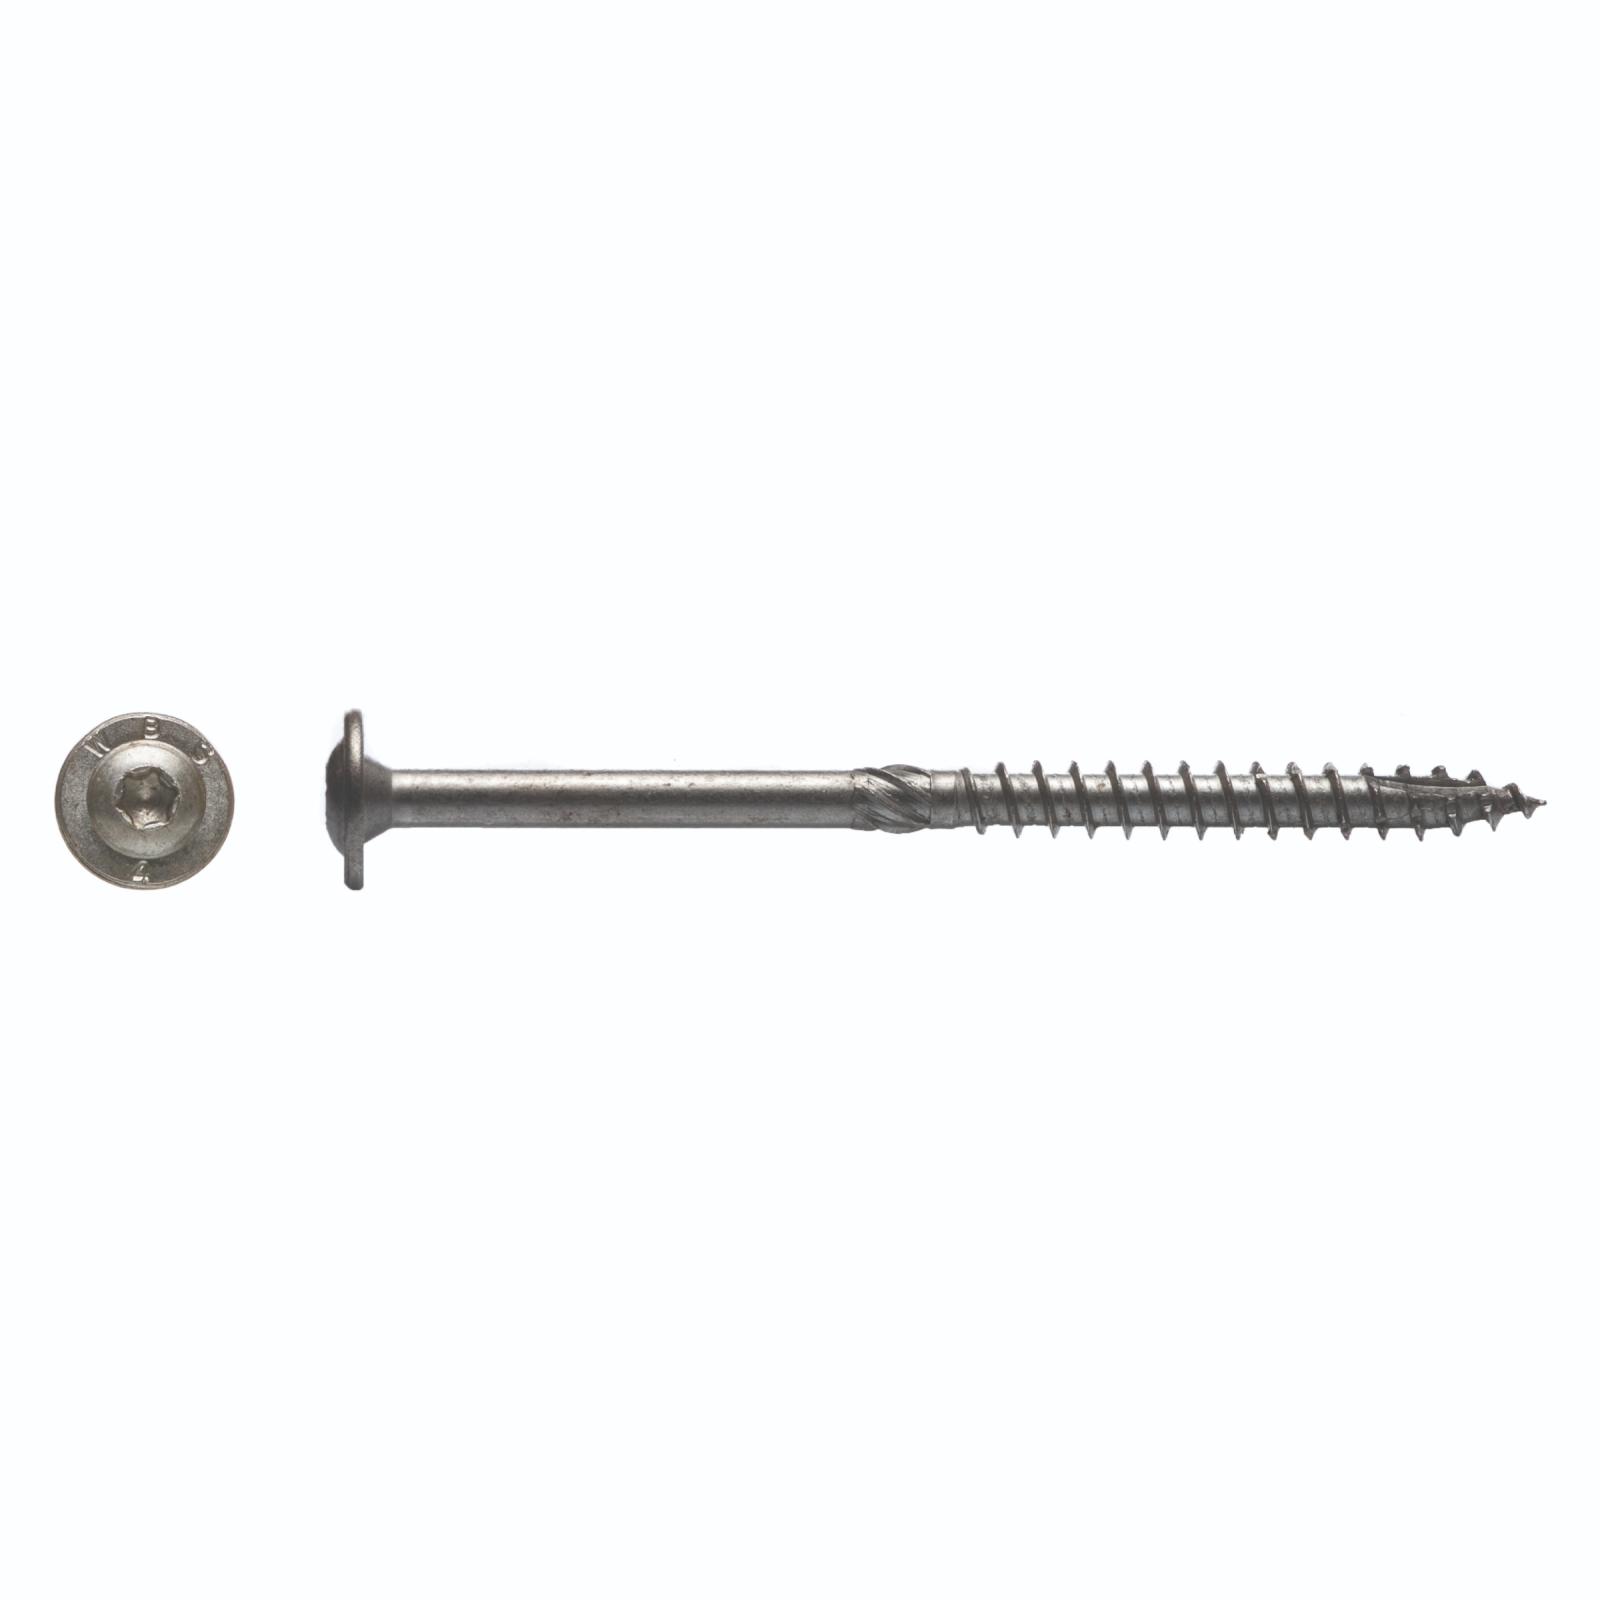 Big Timber Fasteners #15 SCTX Structural Lag Screws